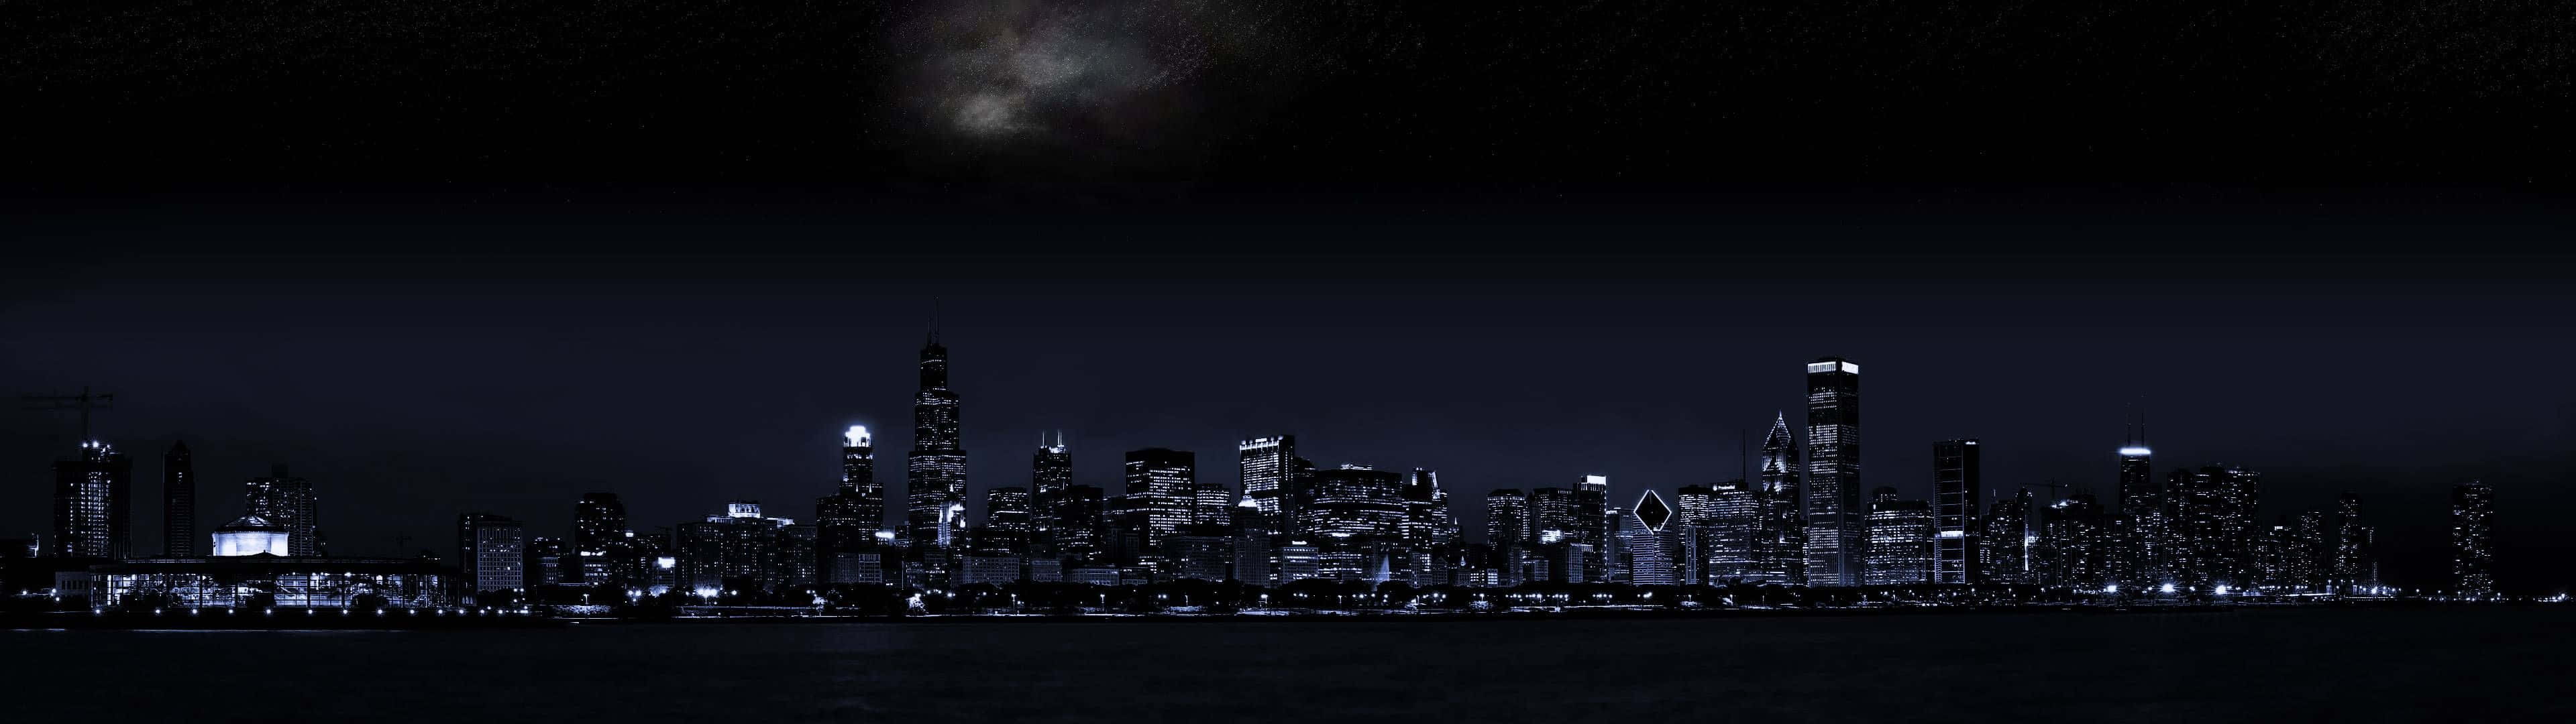 Free City At Night Wallpaper Downloads, [100+] City At Night Wallpapers for  FREE 